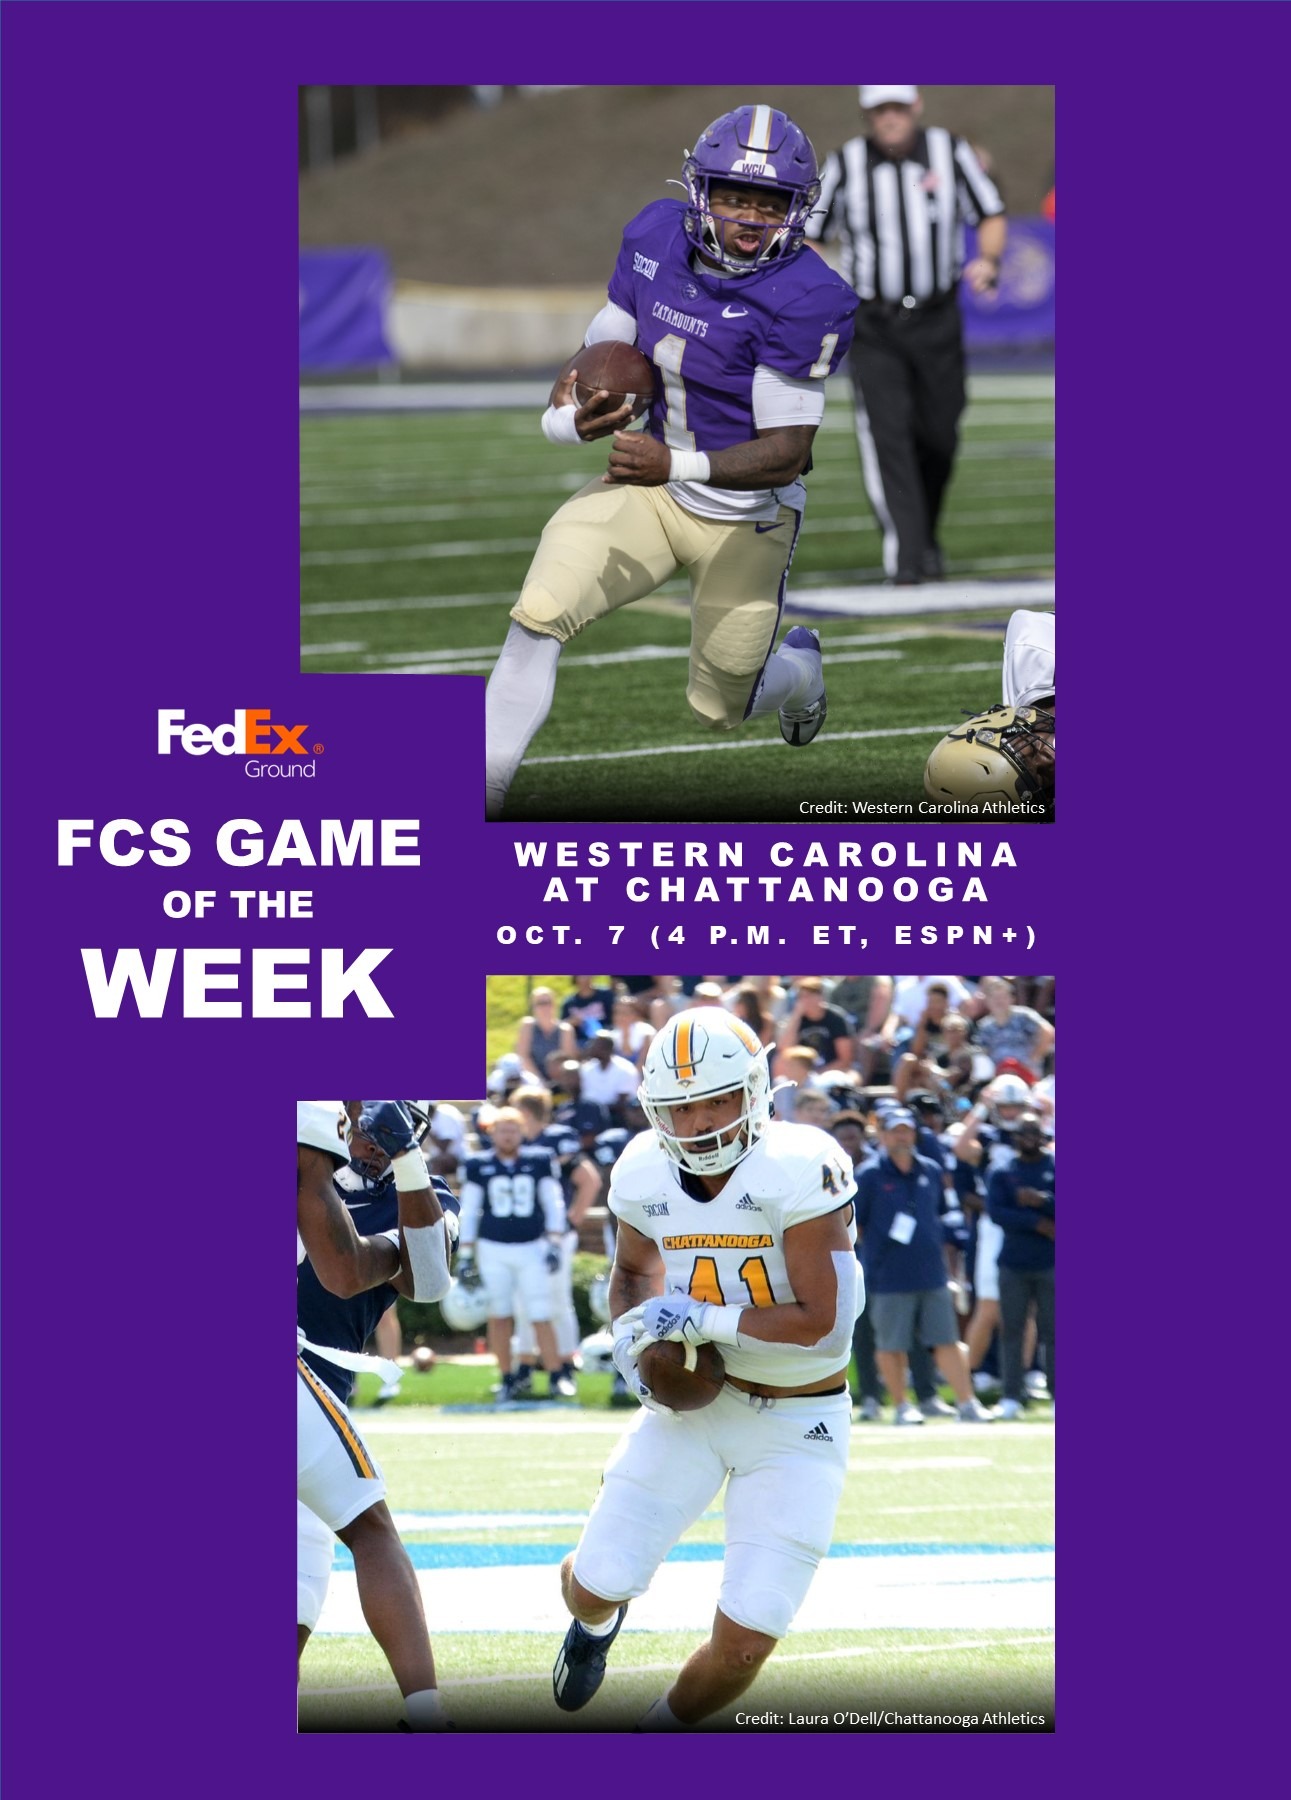 Fcs Football Week 6 Preview And Predictions The Analyst 7621